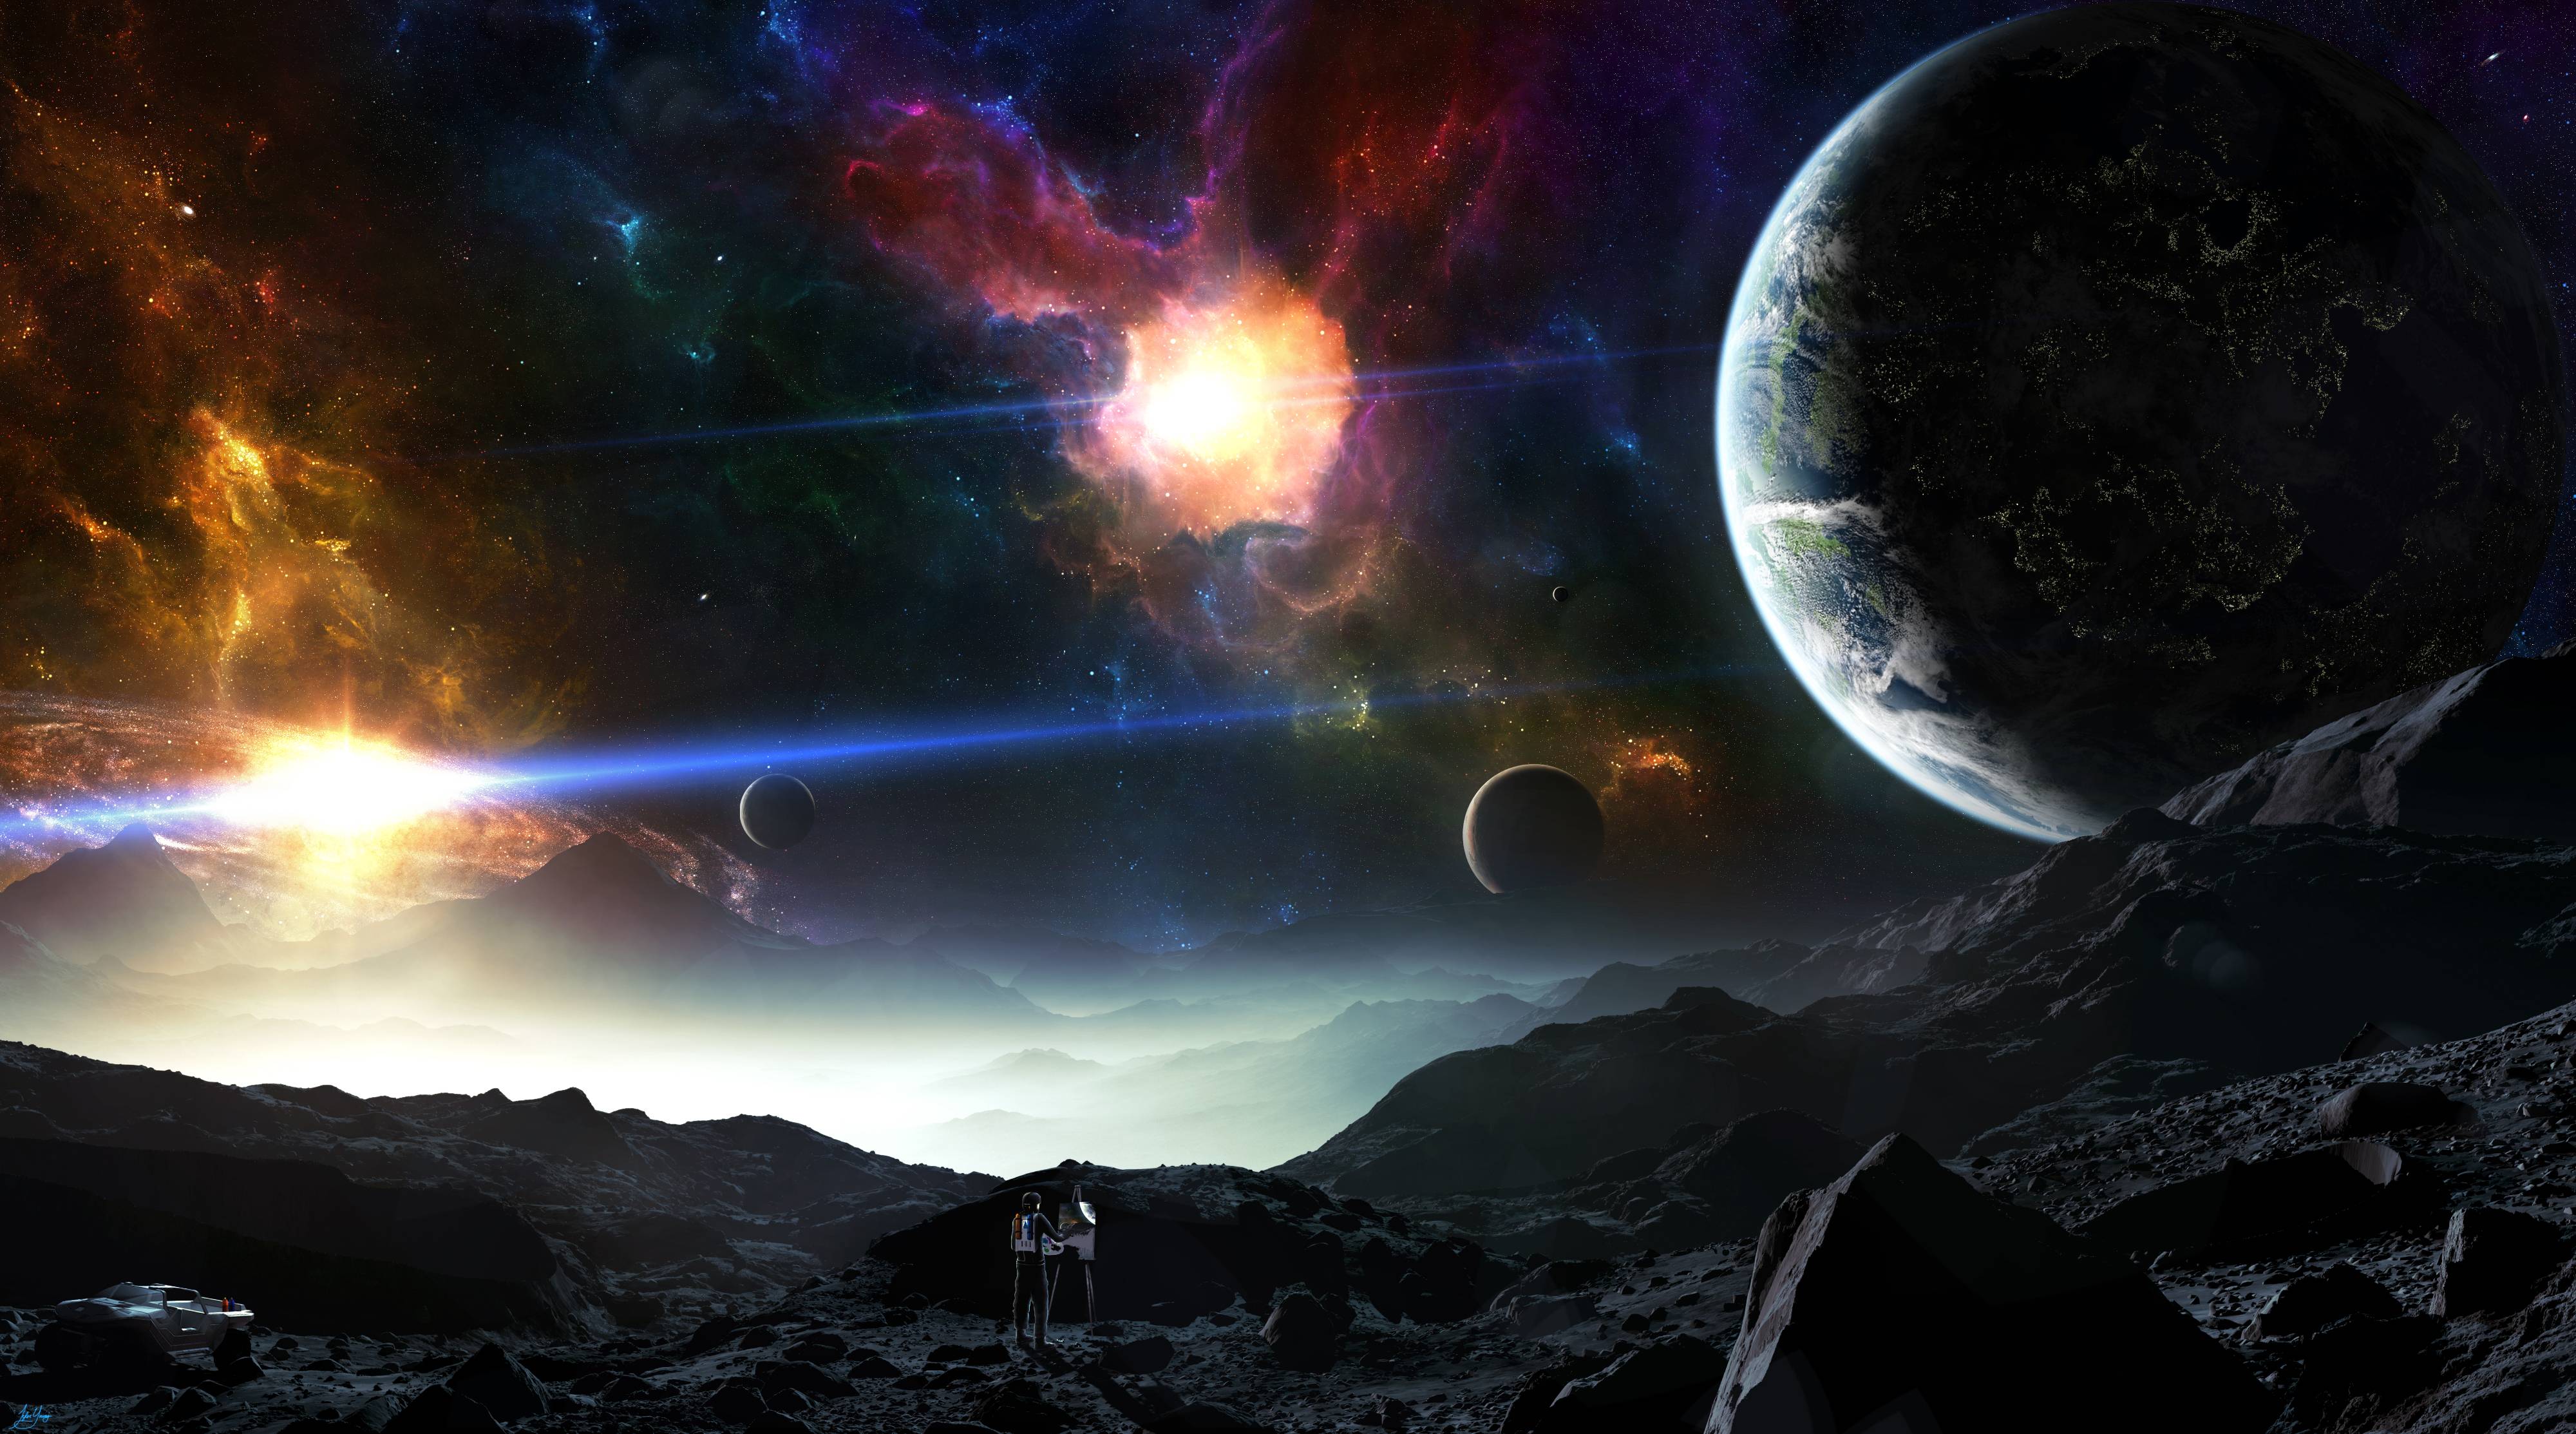 SpaceFantasy Wallpaper Set 99  Awesome Wallpapers